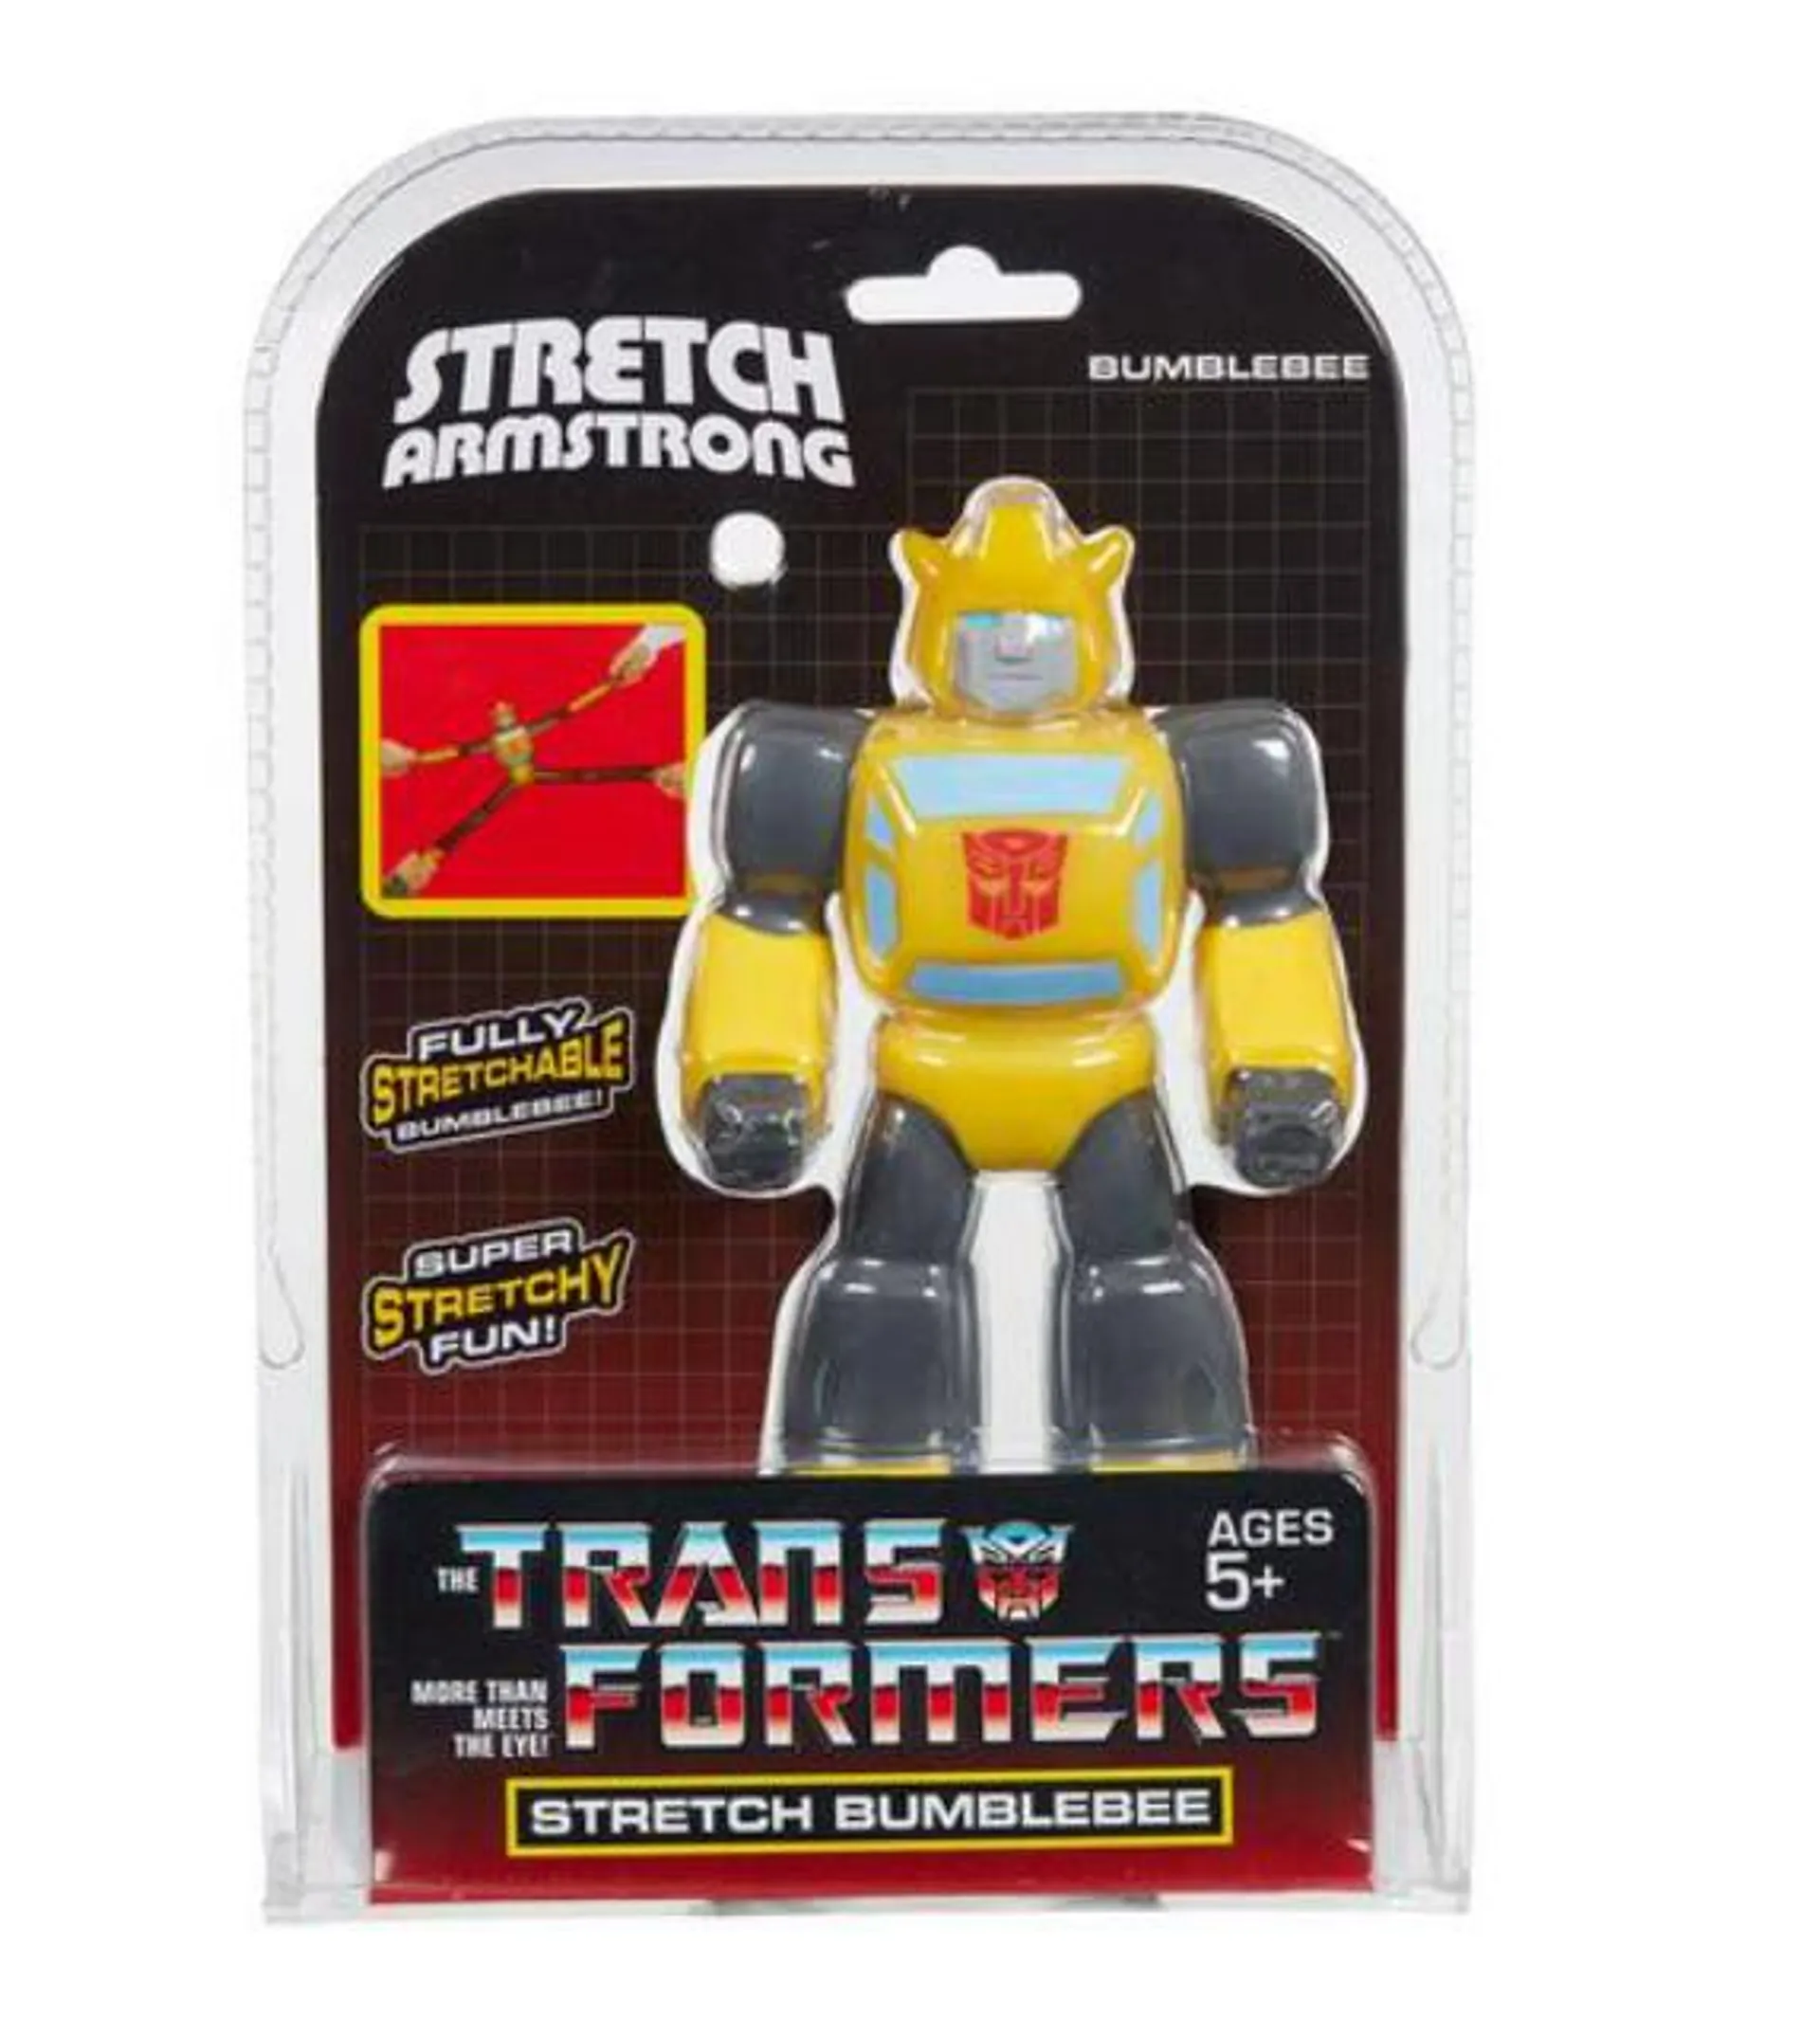 STRETCH ARMSTRONG TRANSFORMERS STRETCH BUMBLEBEE